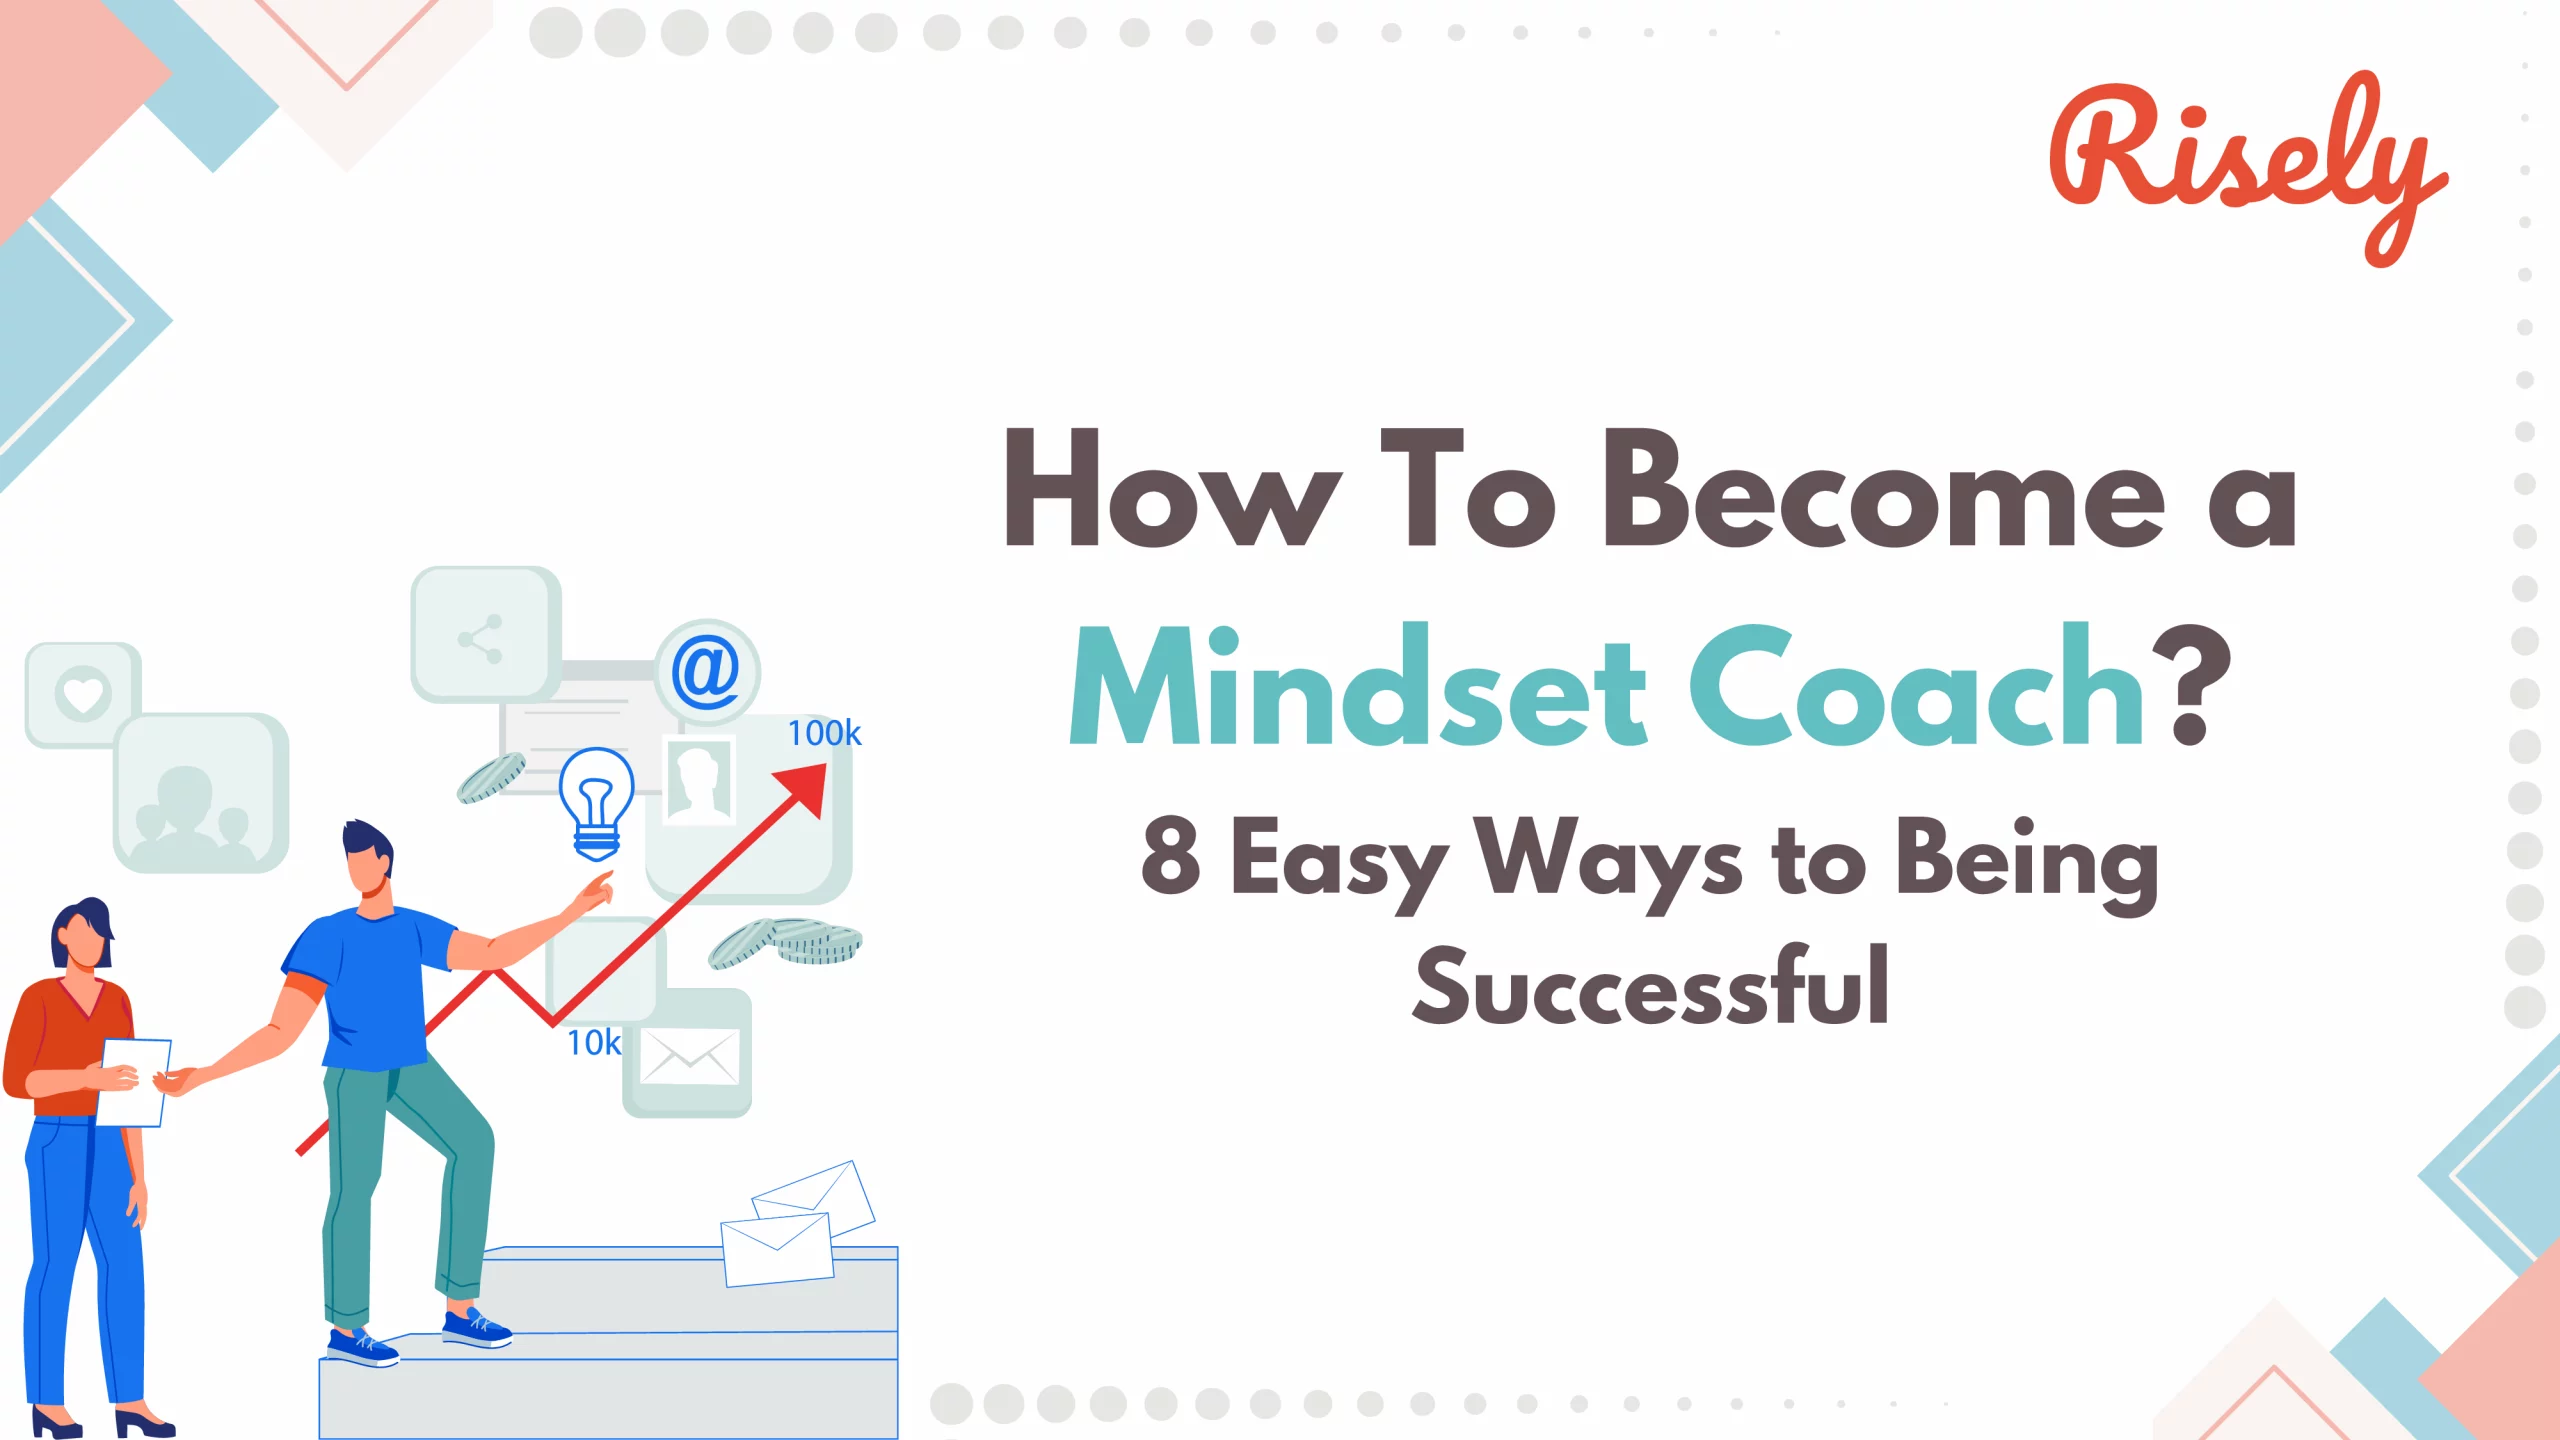 How To Become a Mindset Coach? 8 Easy Ways to Being Successful